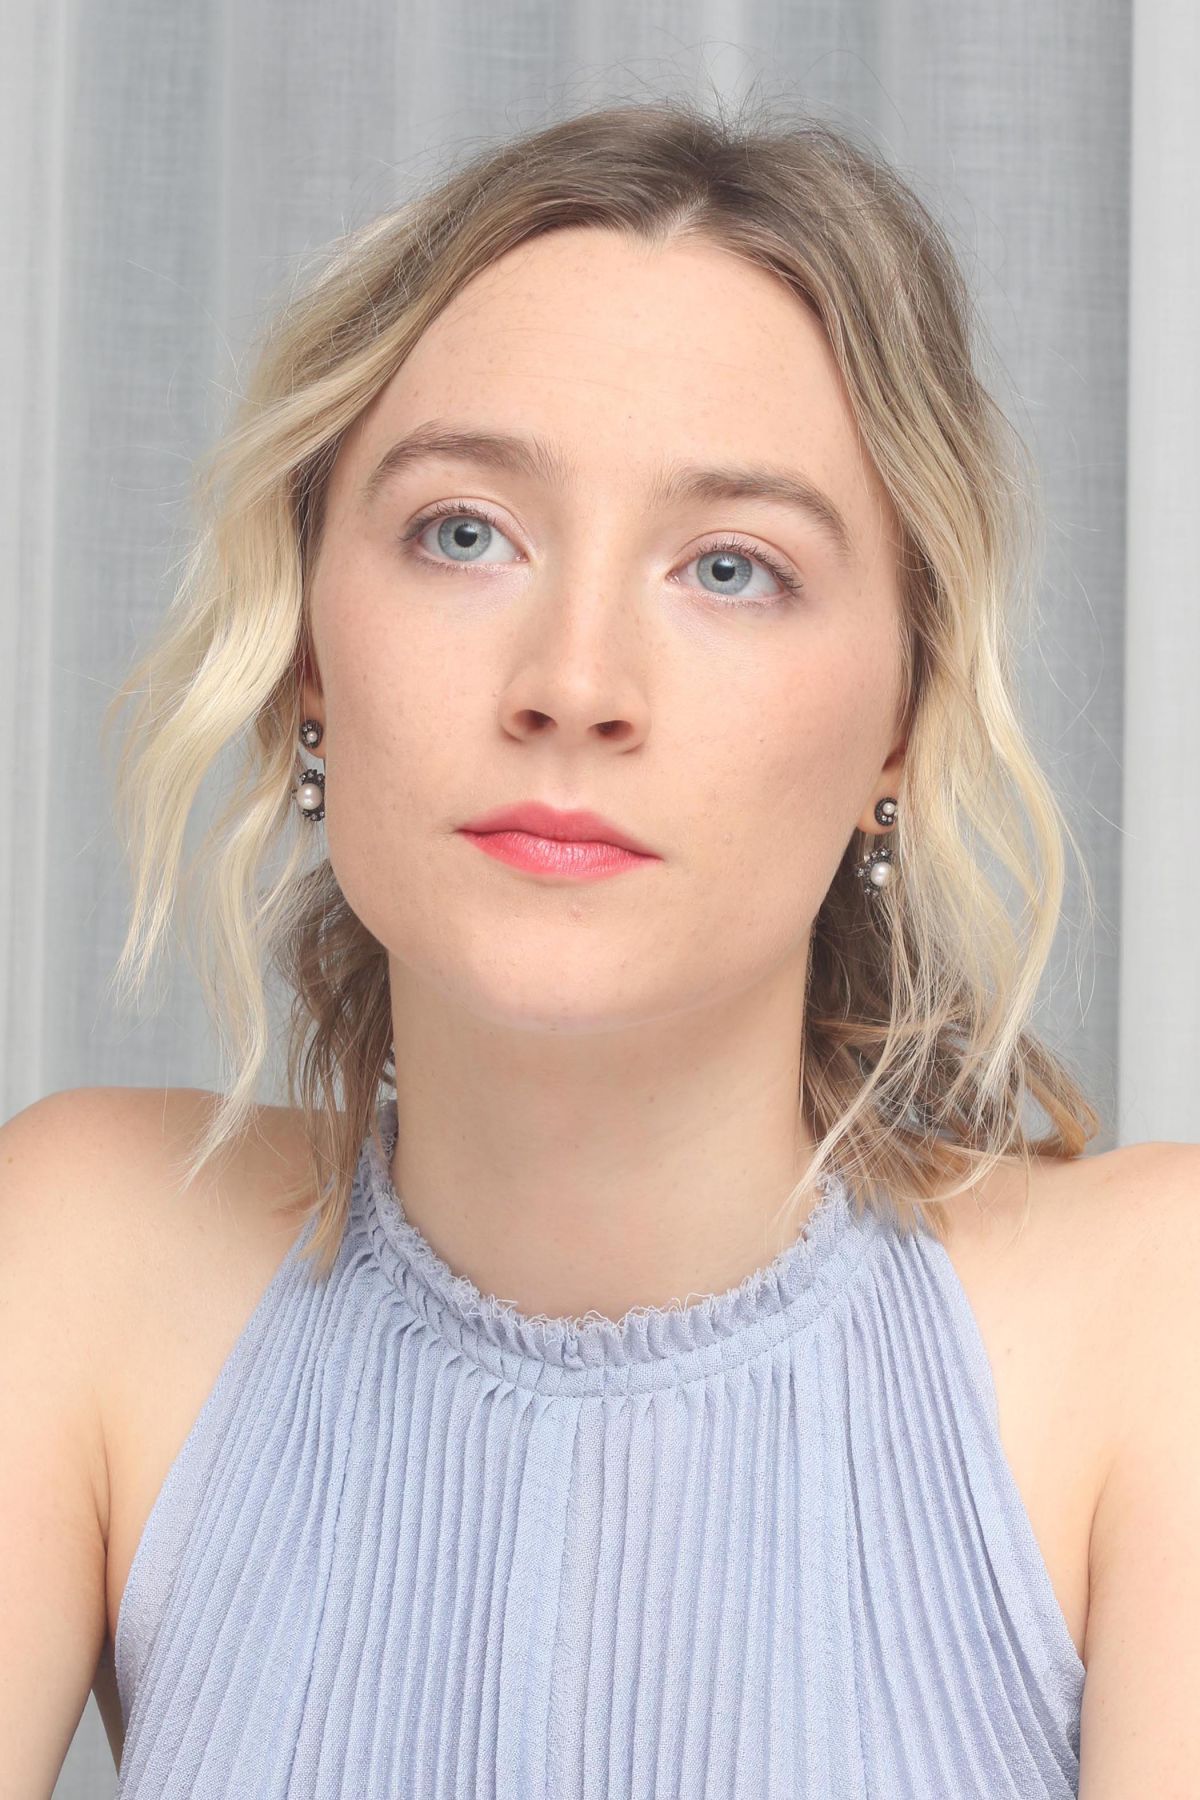 SAOIRSE RONAN at Mary, Queen of Scots Press Conference in Los Angeles 11/28/2018 - HawtCelebs